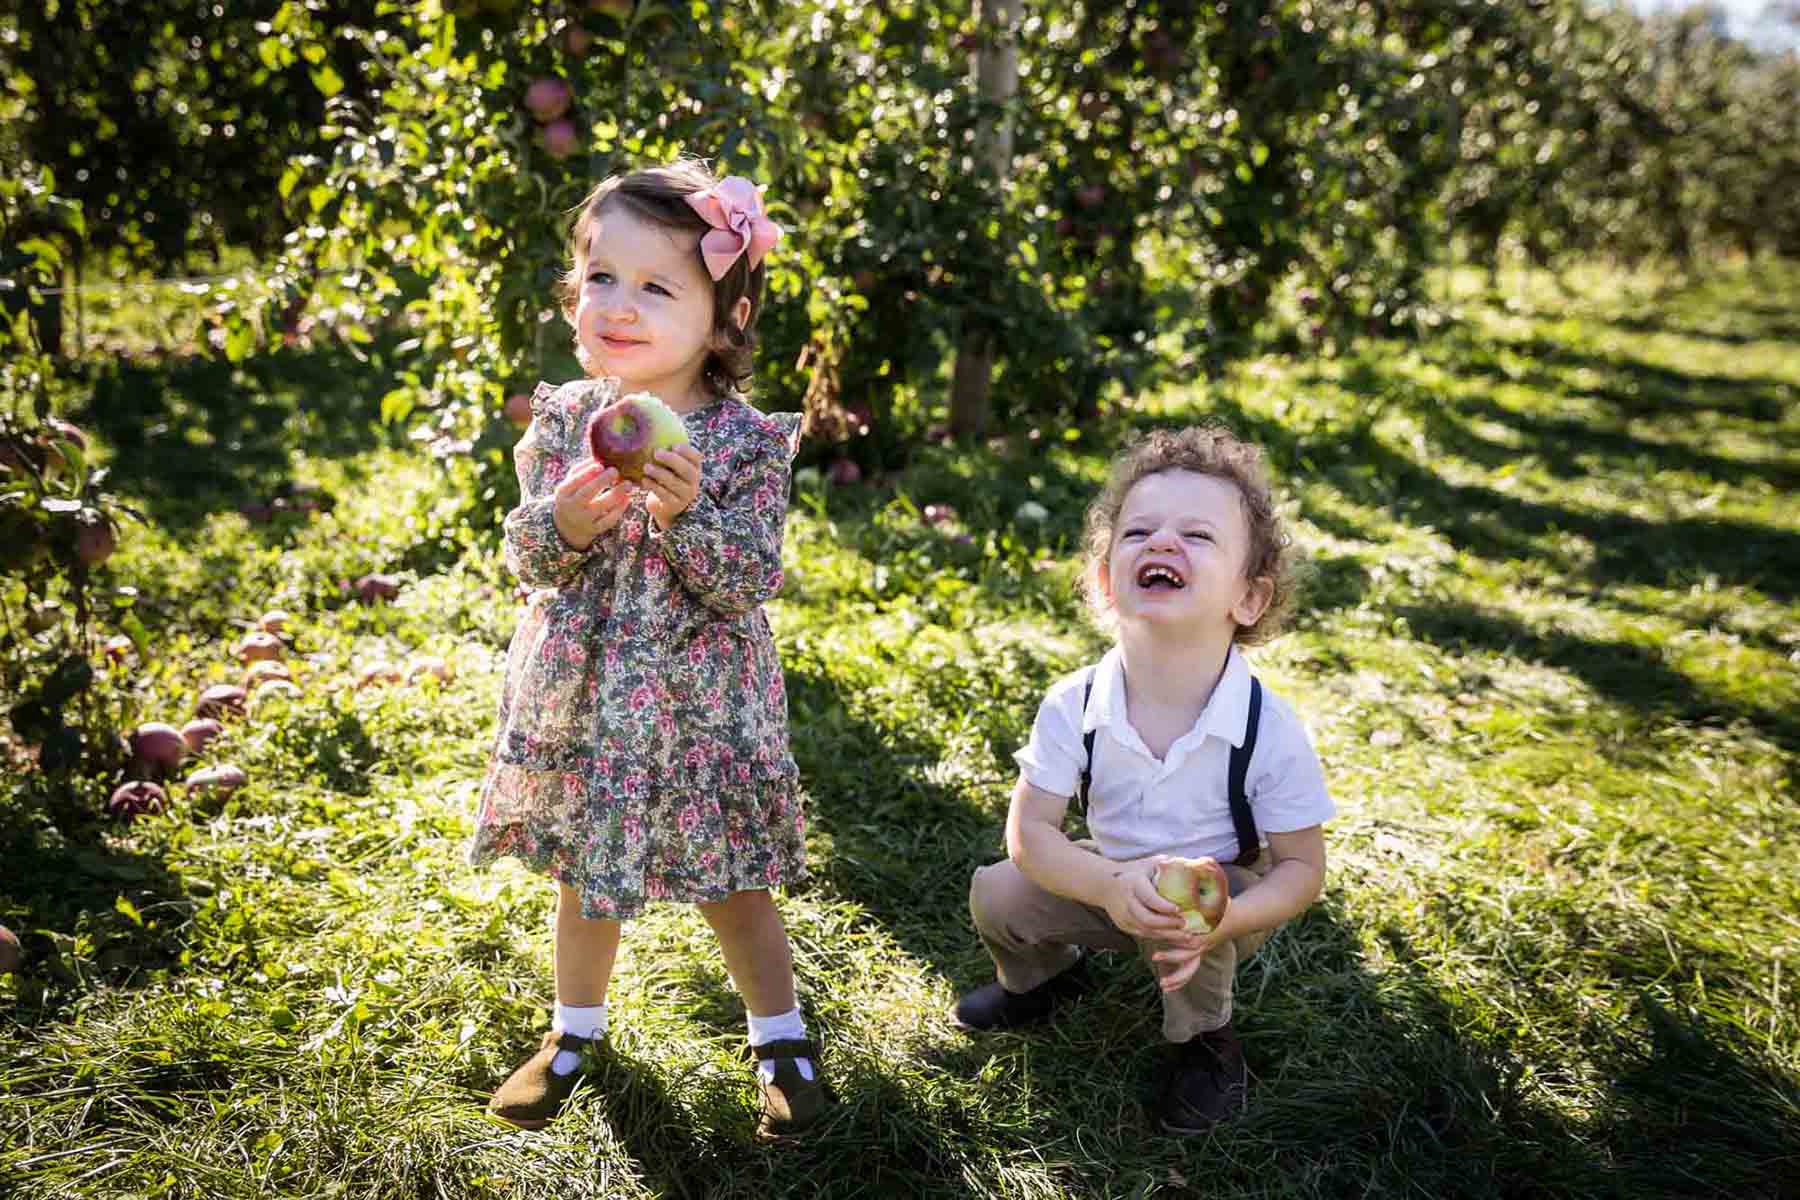 Two toddlers laughing while holding apples in an orchard